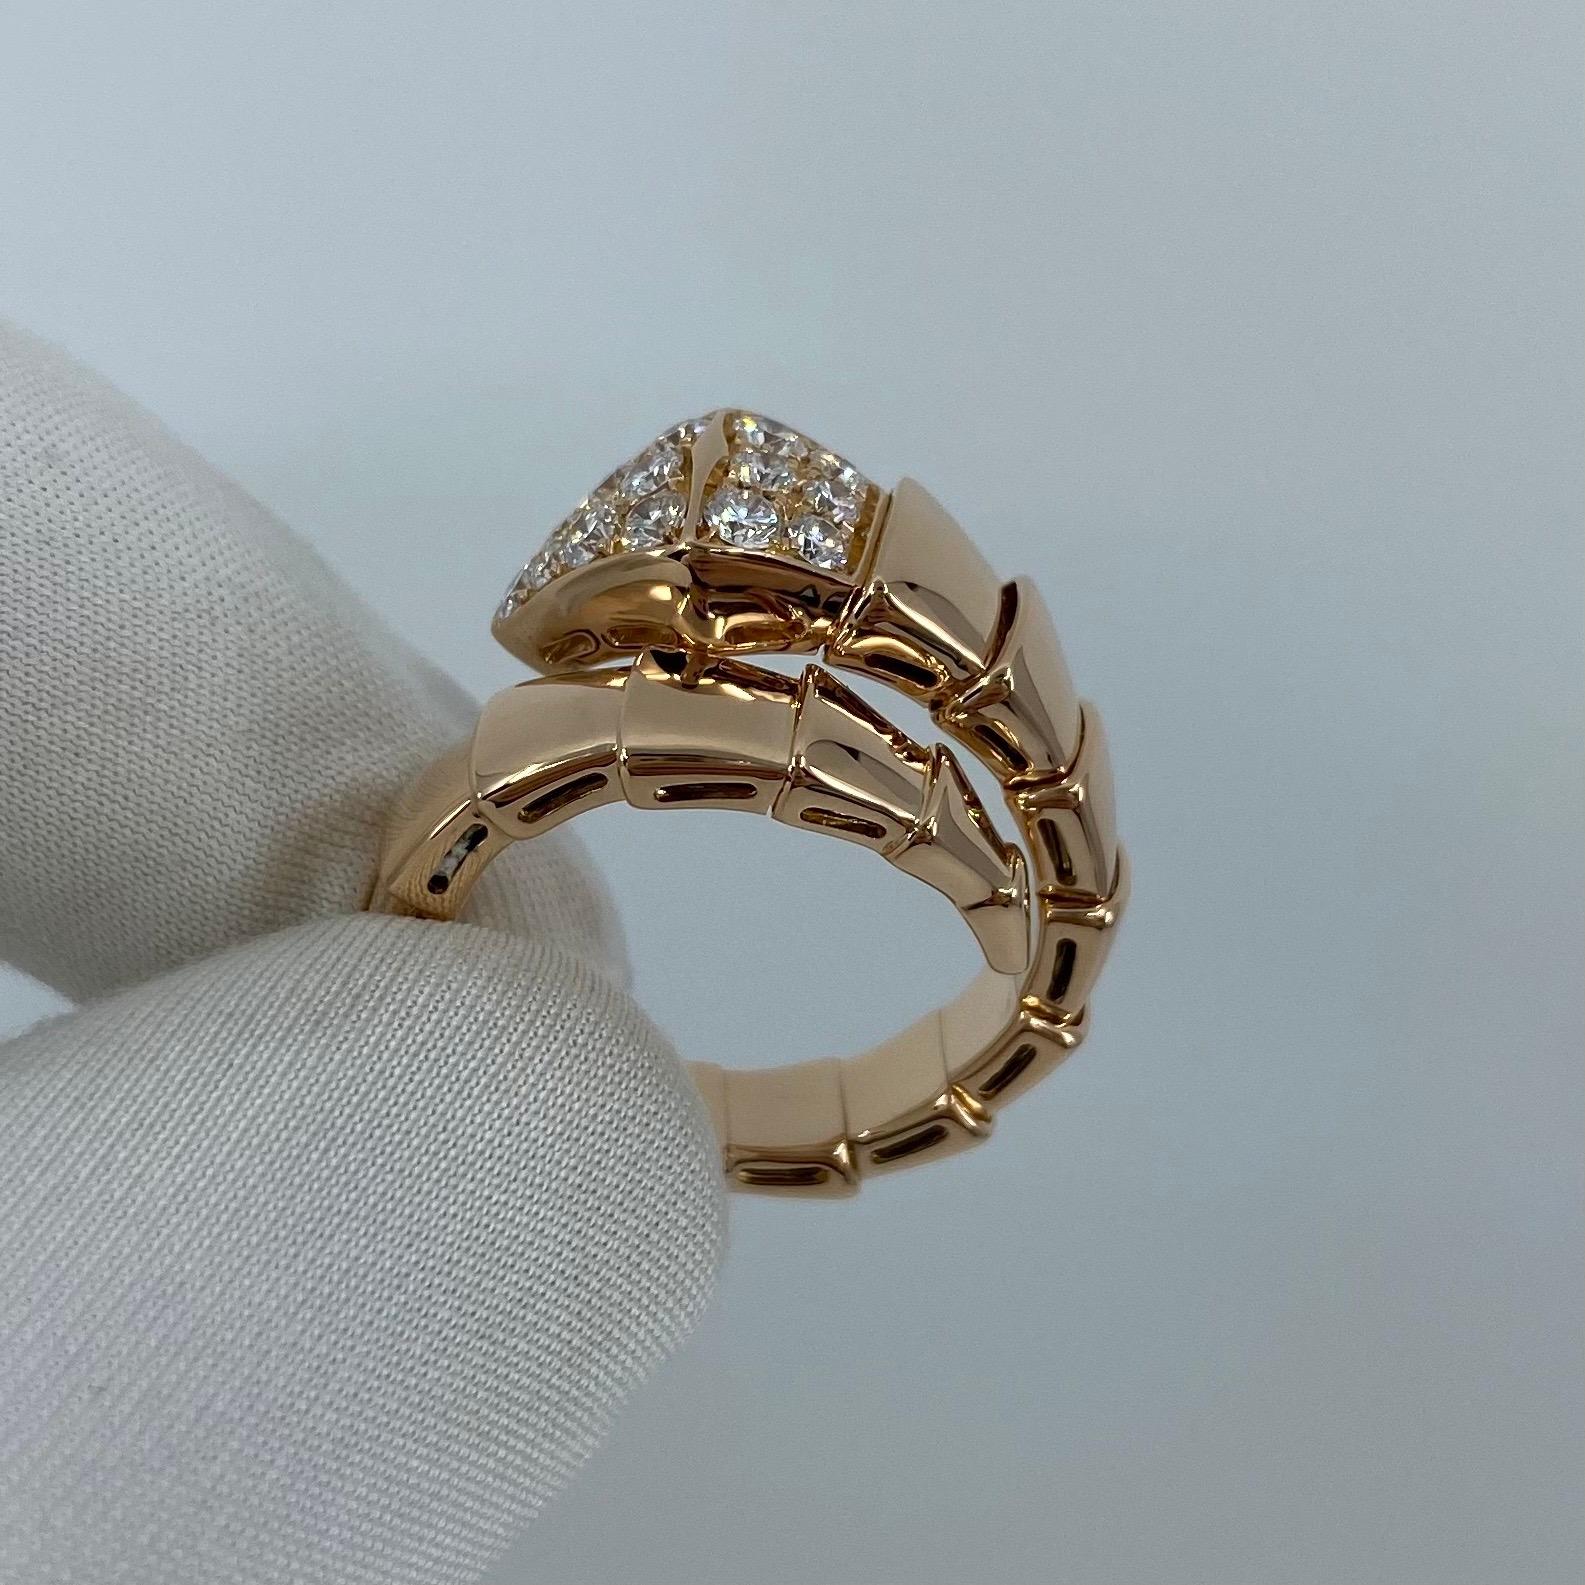 Bulgari Diamond Serpenti 18 Karat Rose Gold Spring Snake Ring.
Serpenti Viper one-coil ring in 18K rose gold, set with pavé diamonds on the head.
In excellent condition, has been professionally polished and cleaned.

In a tribute to its spirit